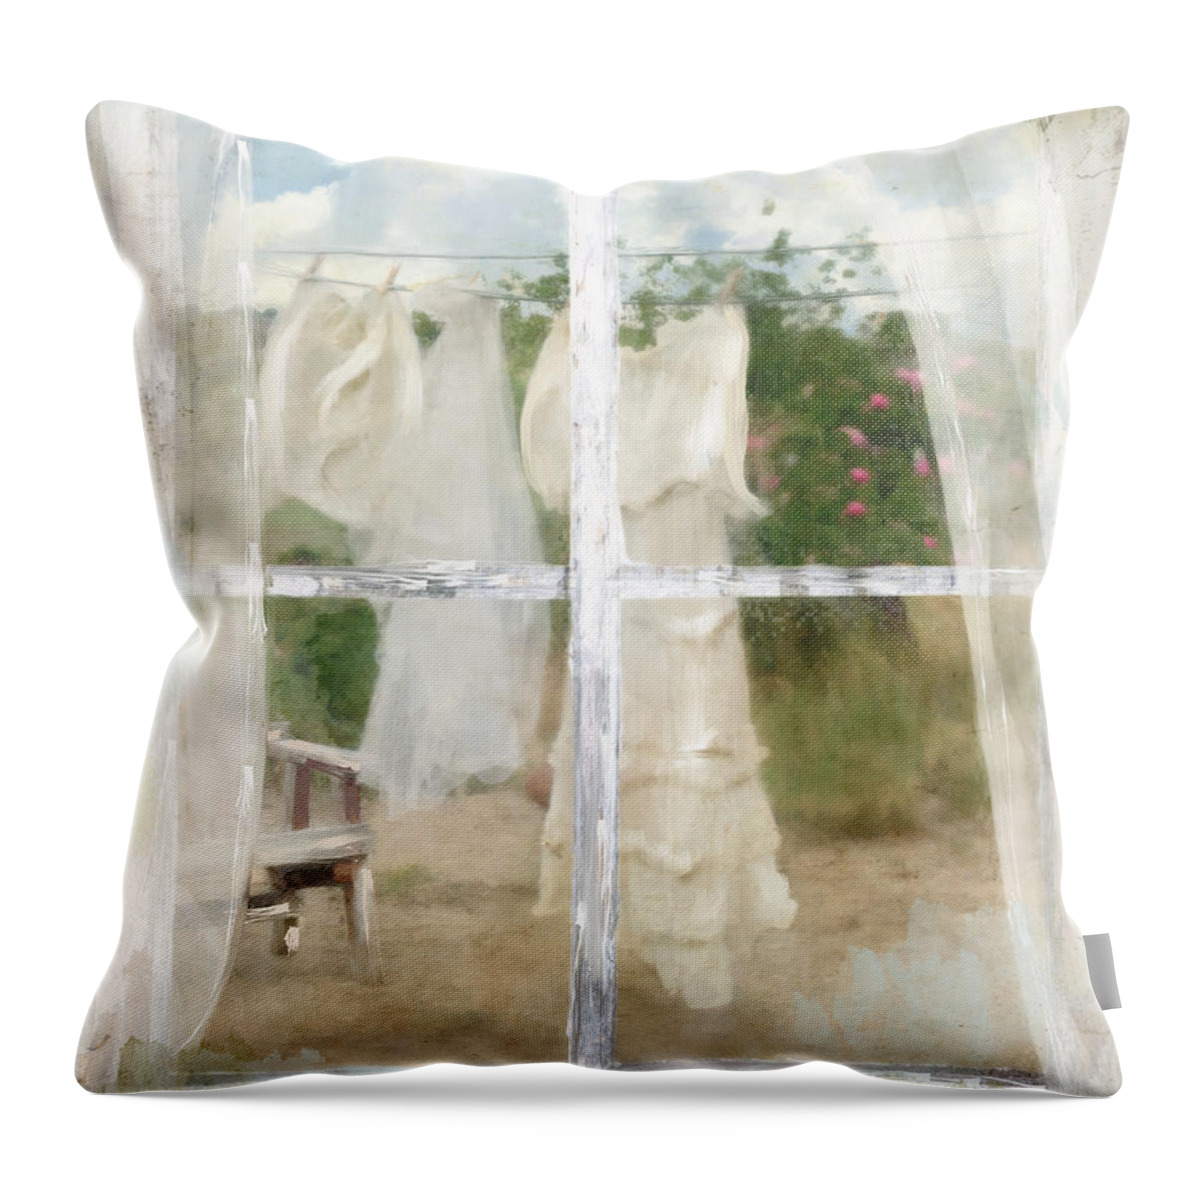 Laundry Throw Pillow featuring the painting Laundry Day by Mindy Sommers